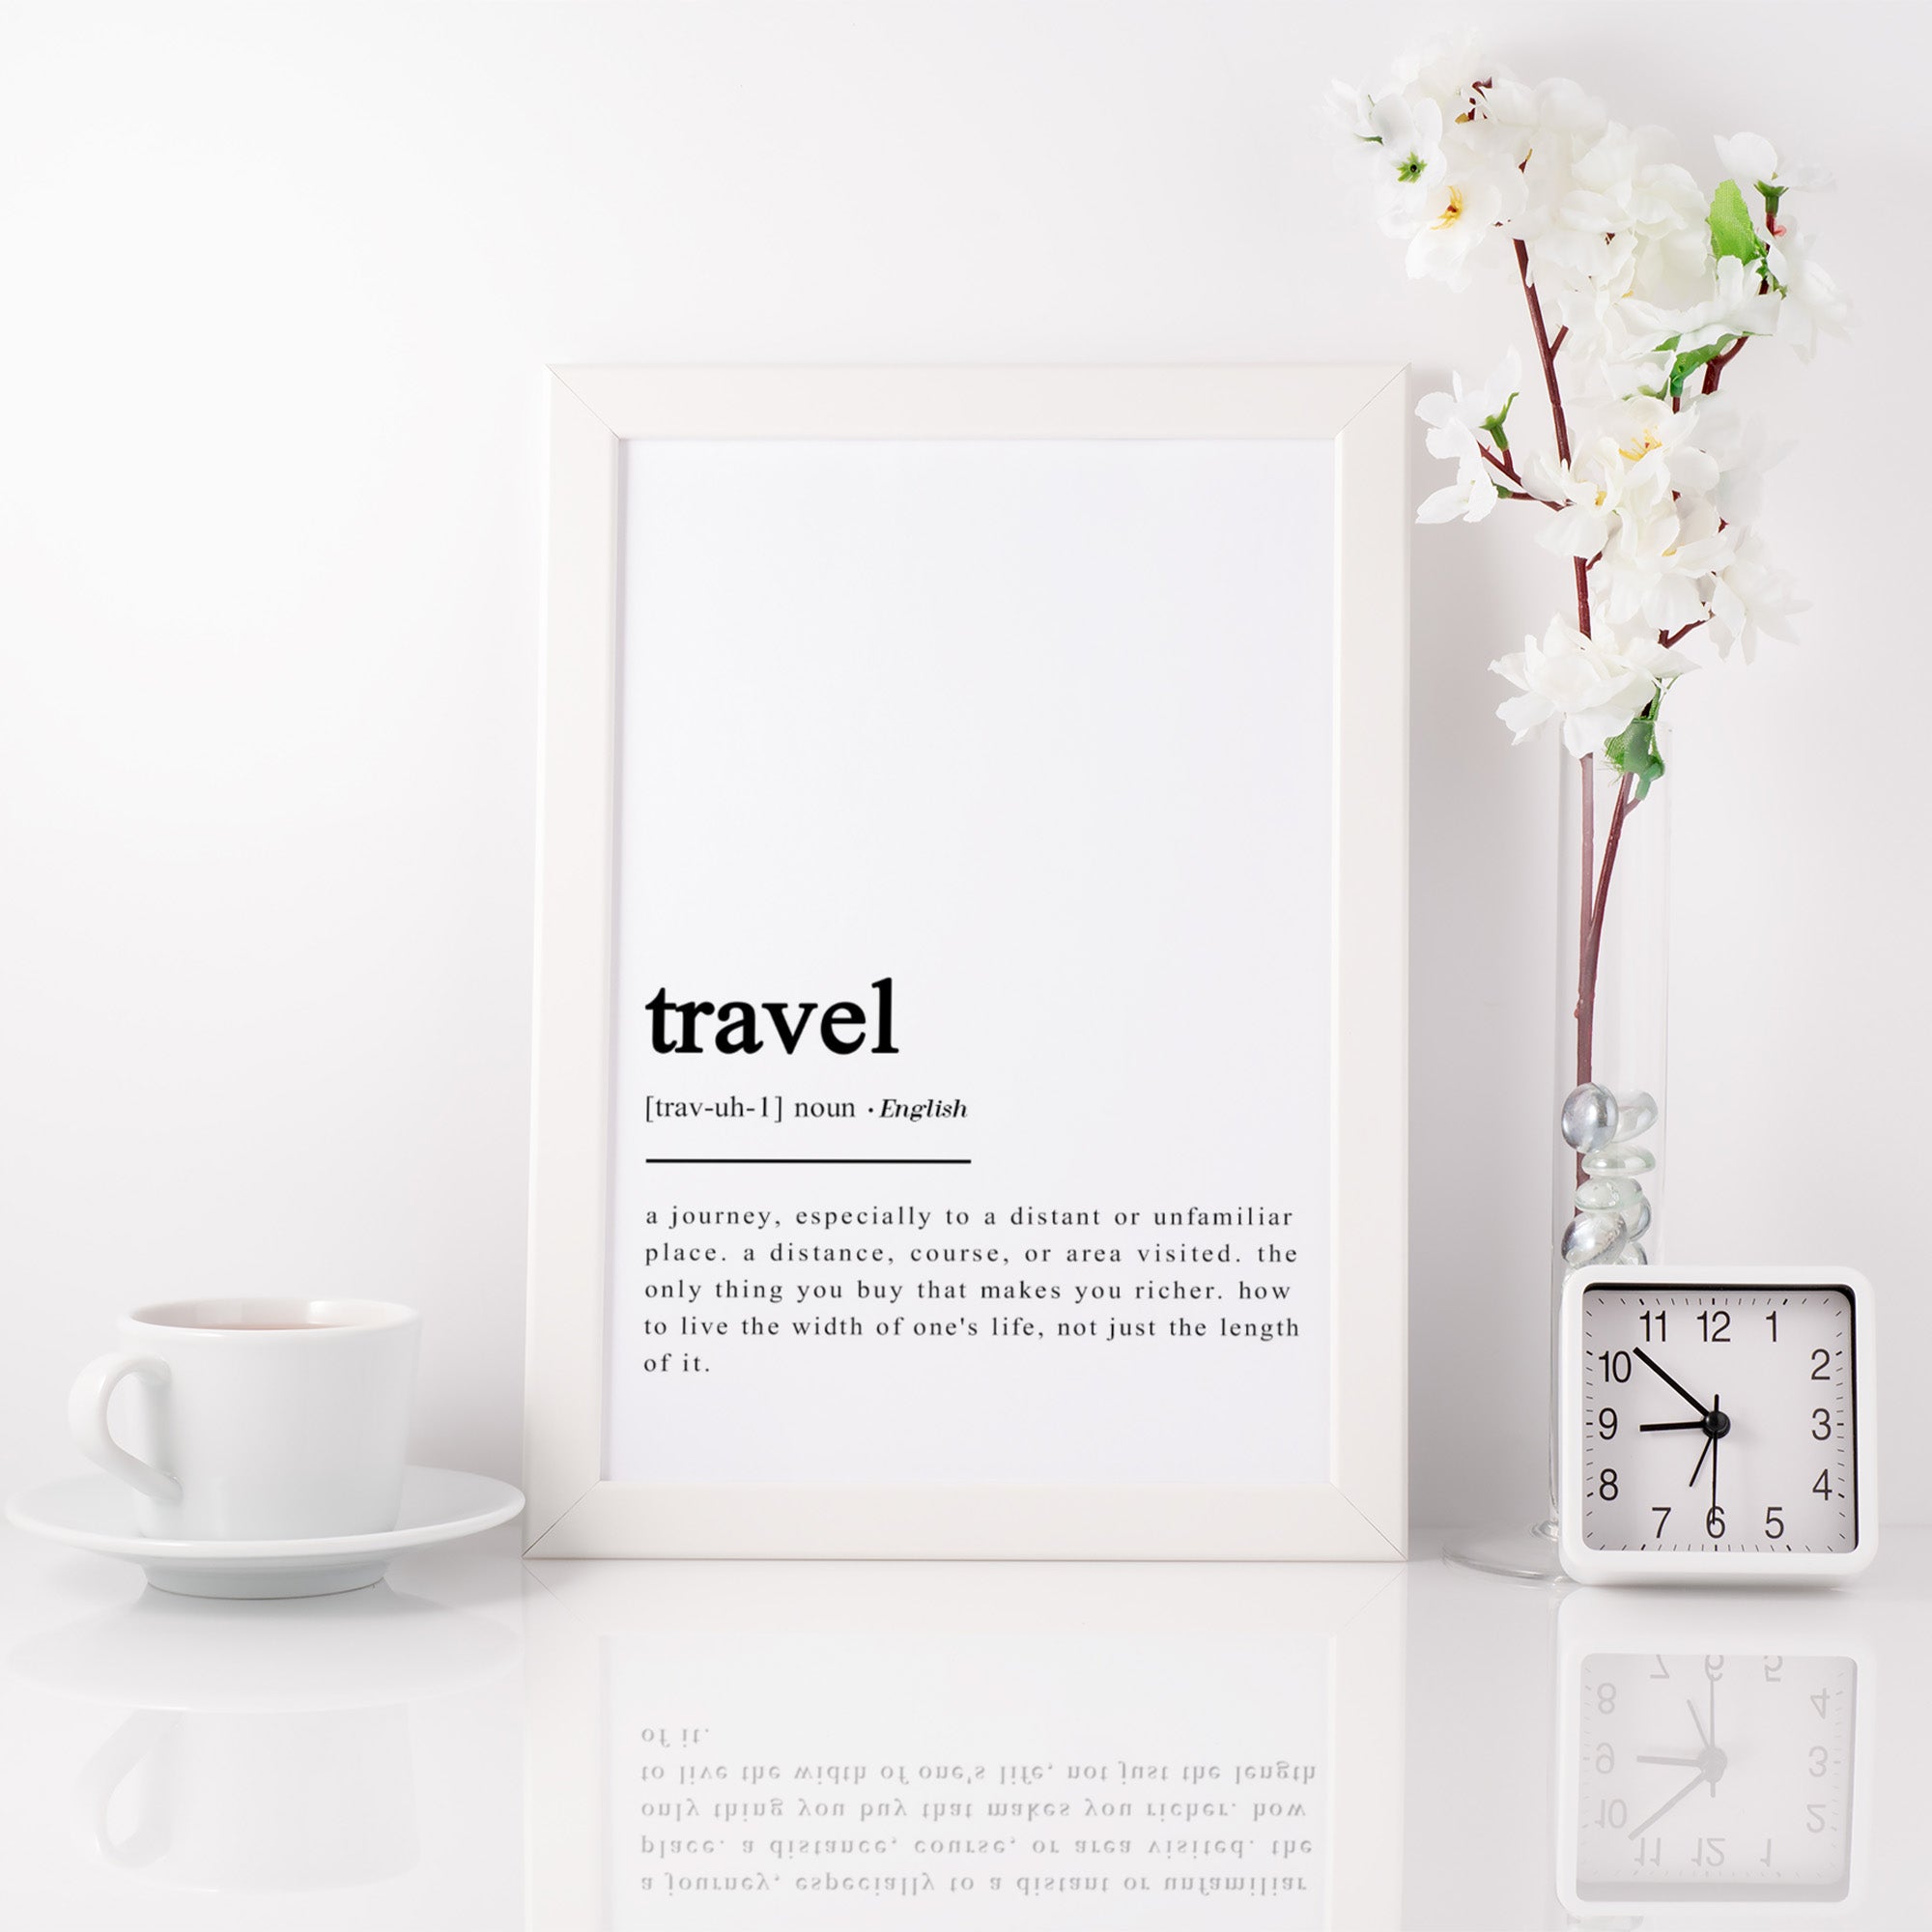 Travel Dictionary Print - Fun Travel Art For Your Home